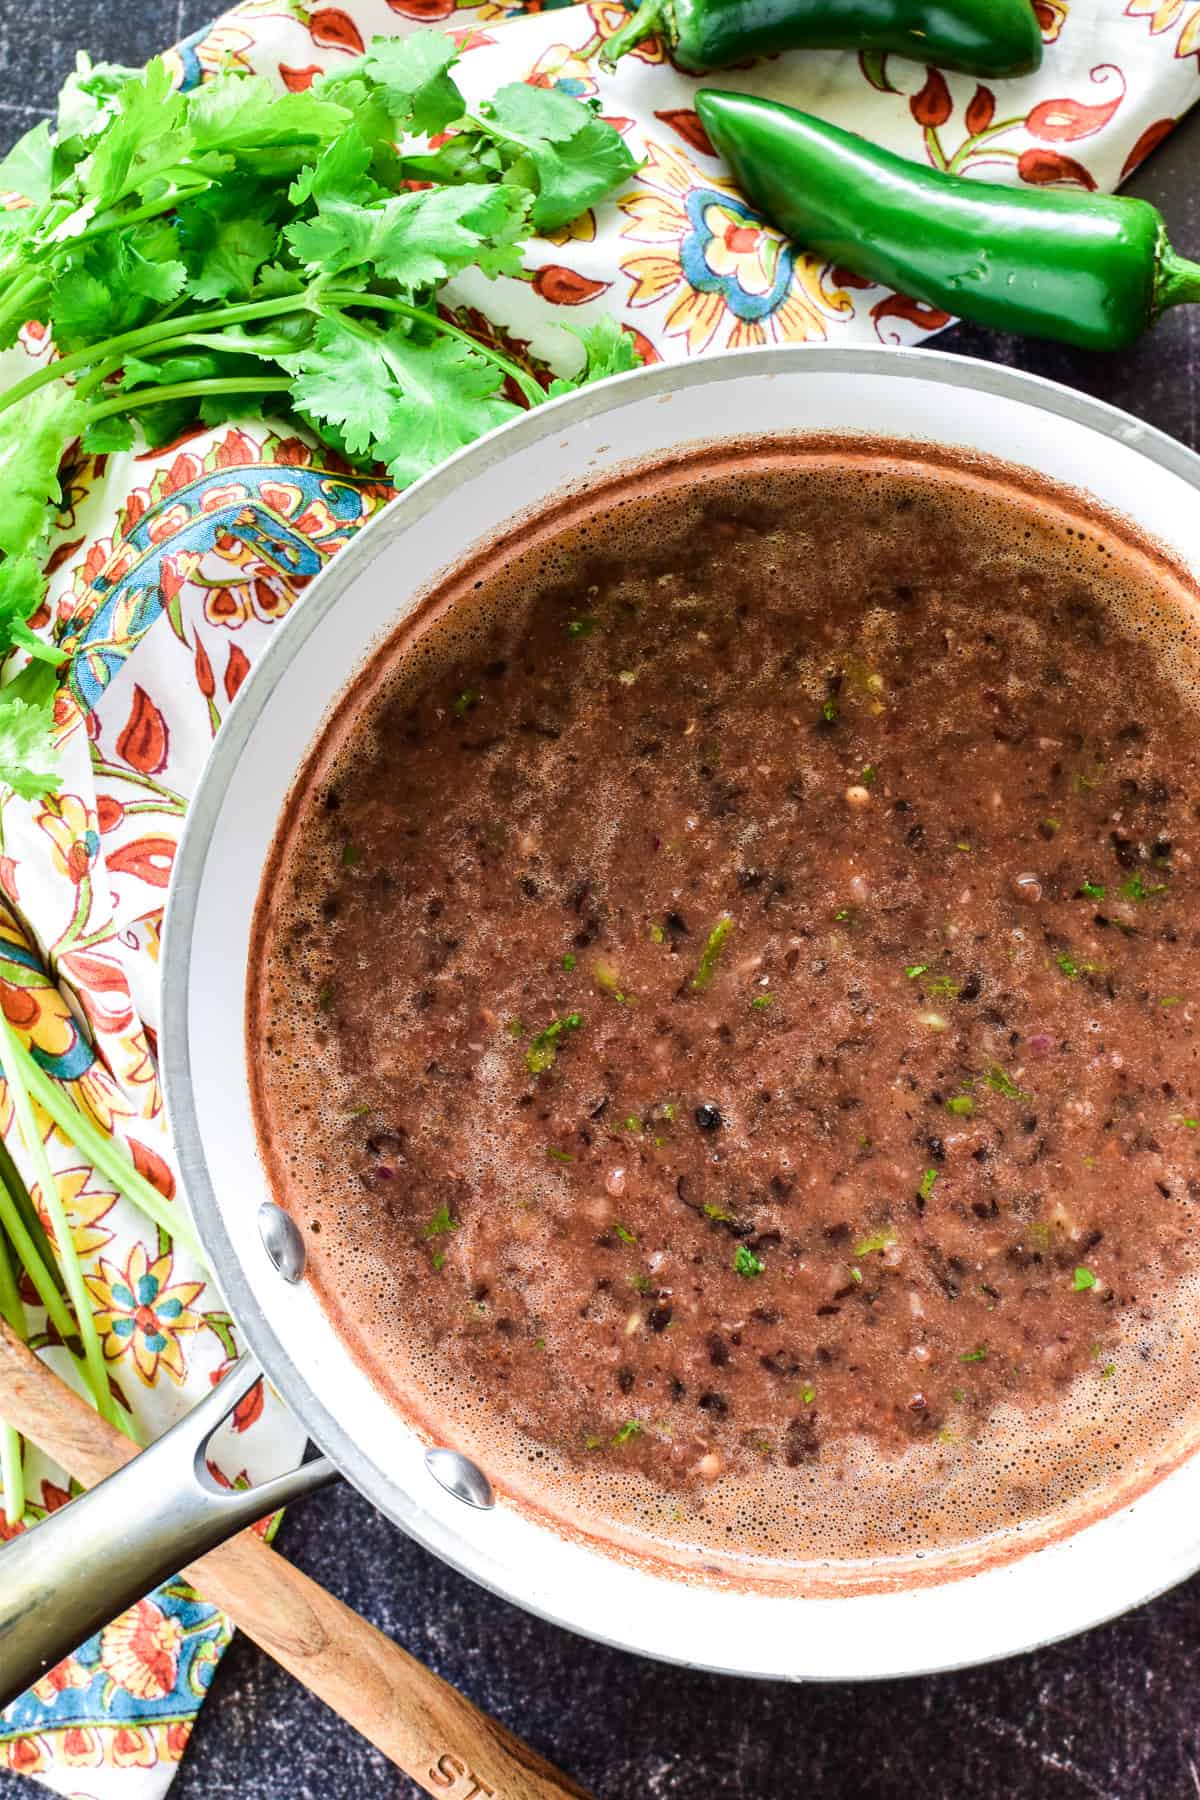 Overhead shot of Black Bean Soup in a white saucepan with a patterned towel and fresh garnishes